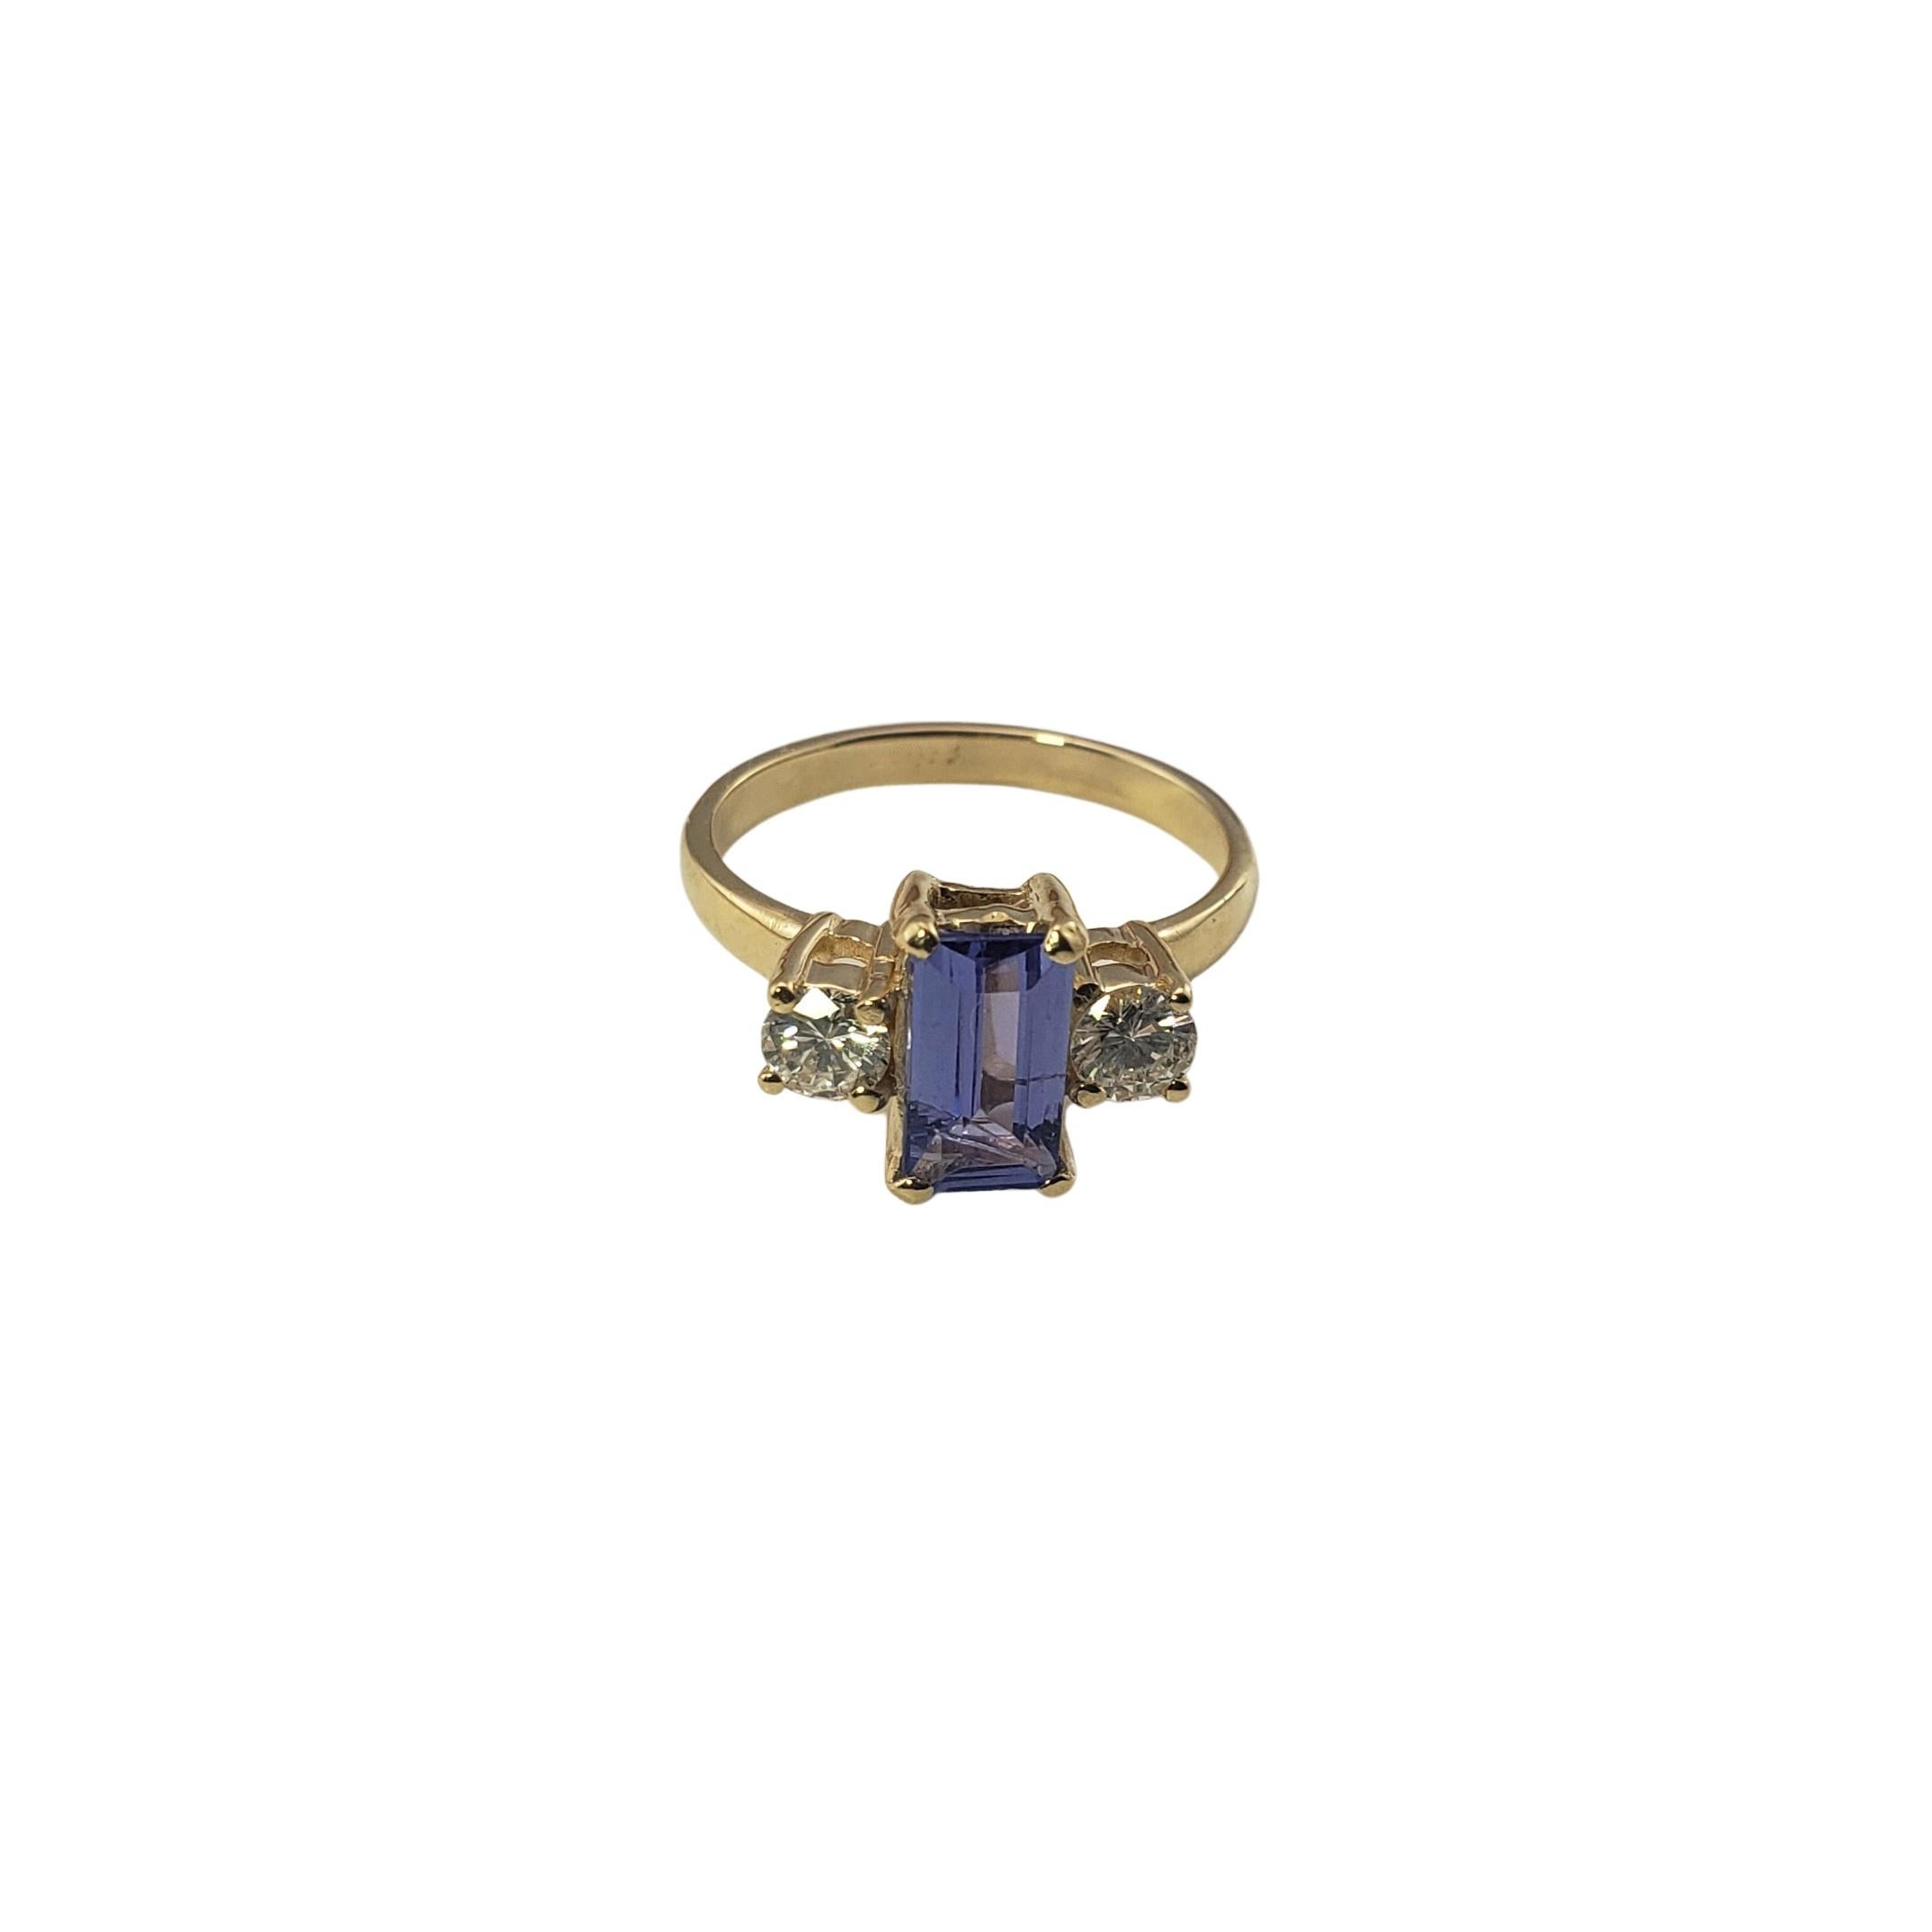 14 Karat Yellow Gold Amethyst and Diamond Ring Size 6 GAI Certified-

This elegant ring features one emerald cut amethyst (8 mm x 5 mm) and two round brilliant cut diamonds* set in classic 14K yellow gold.  Shank:  2 mm.

Amethyst weight:  1.26